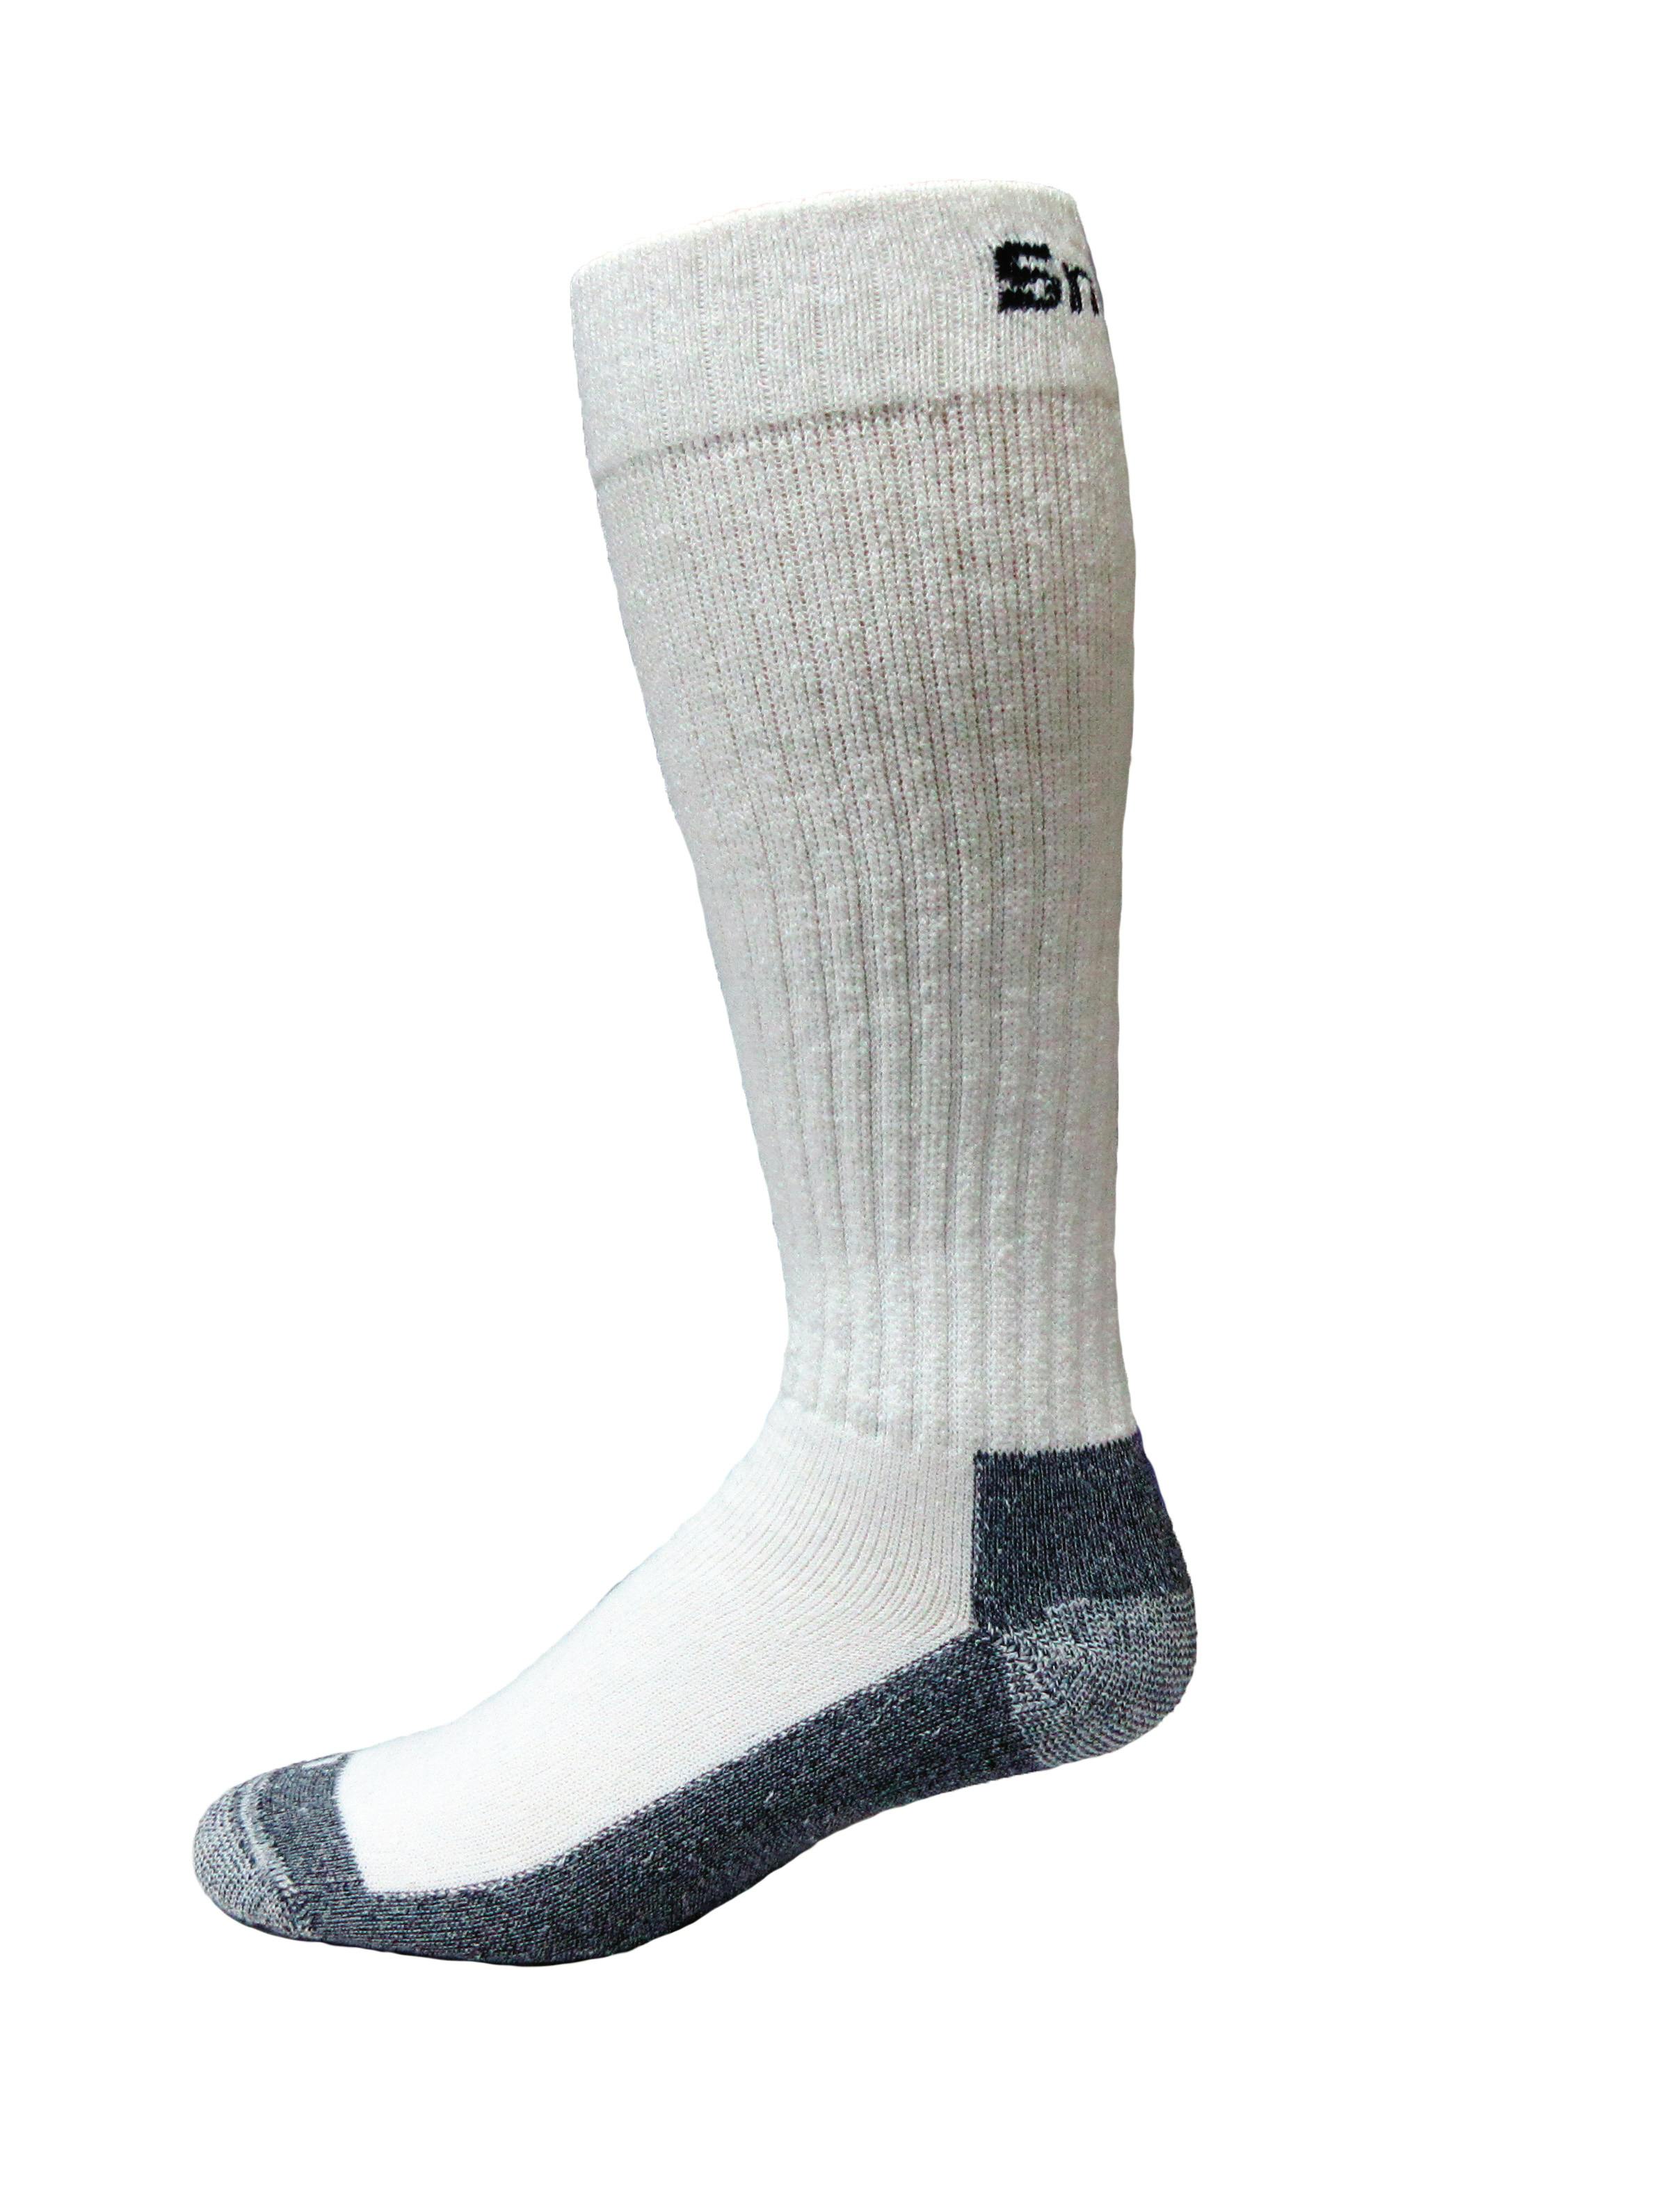 Size Large XL New Snap On Official Licensed Product 1 Pair White Crew Socks 